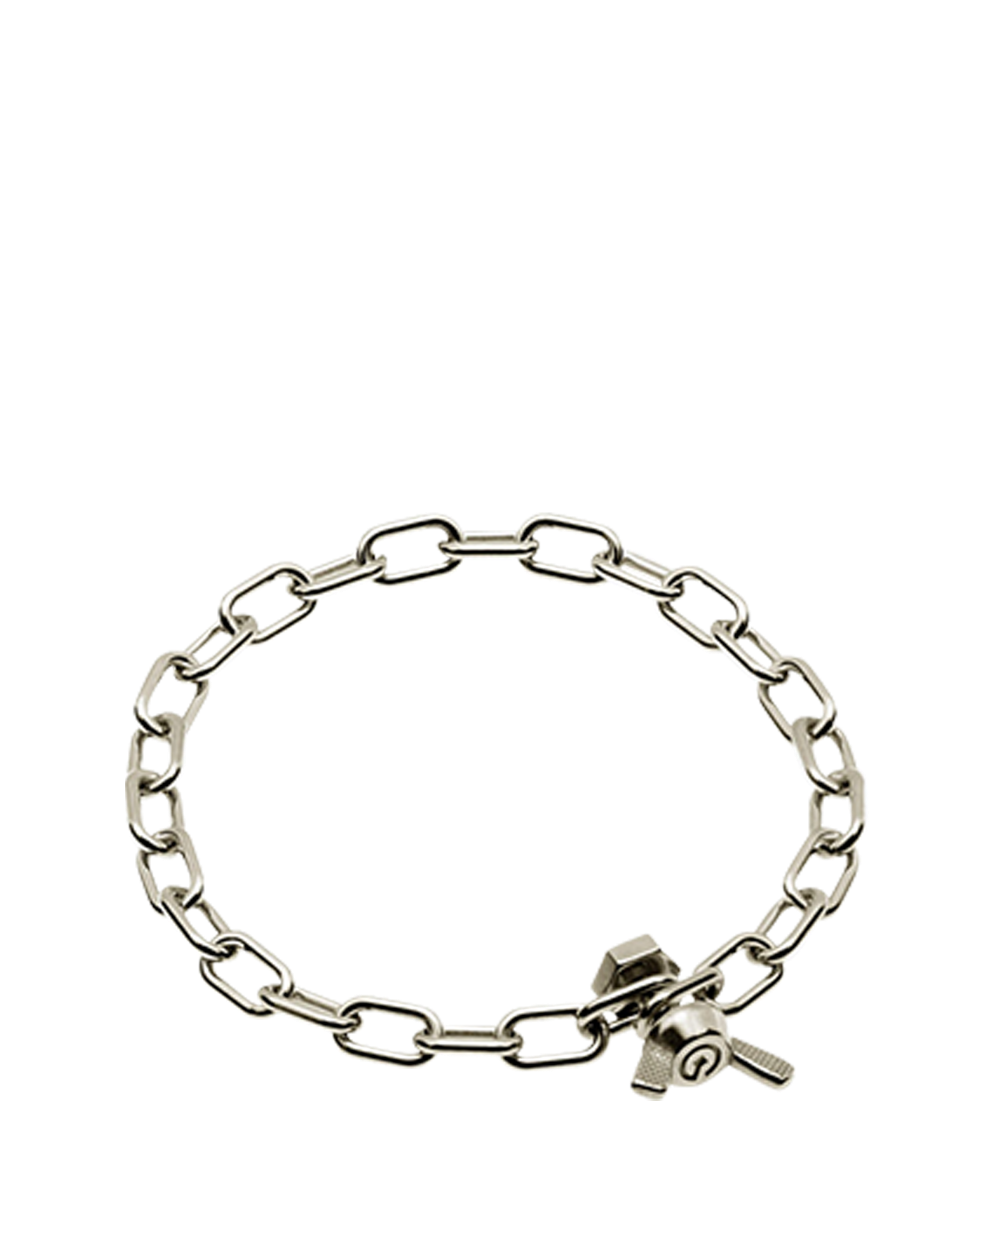 The XS Small Silver Link Bracelet